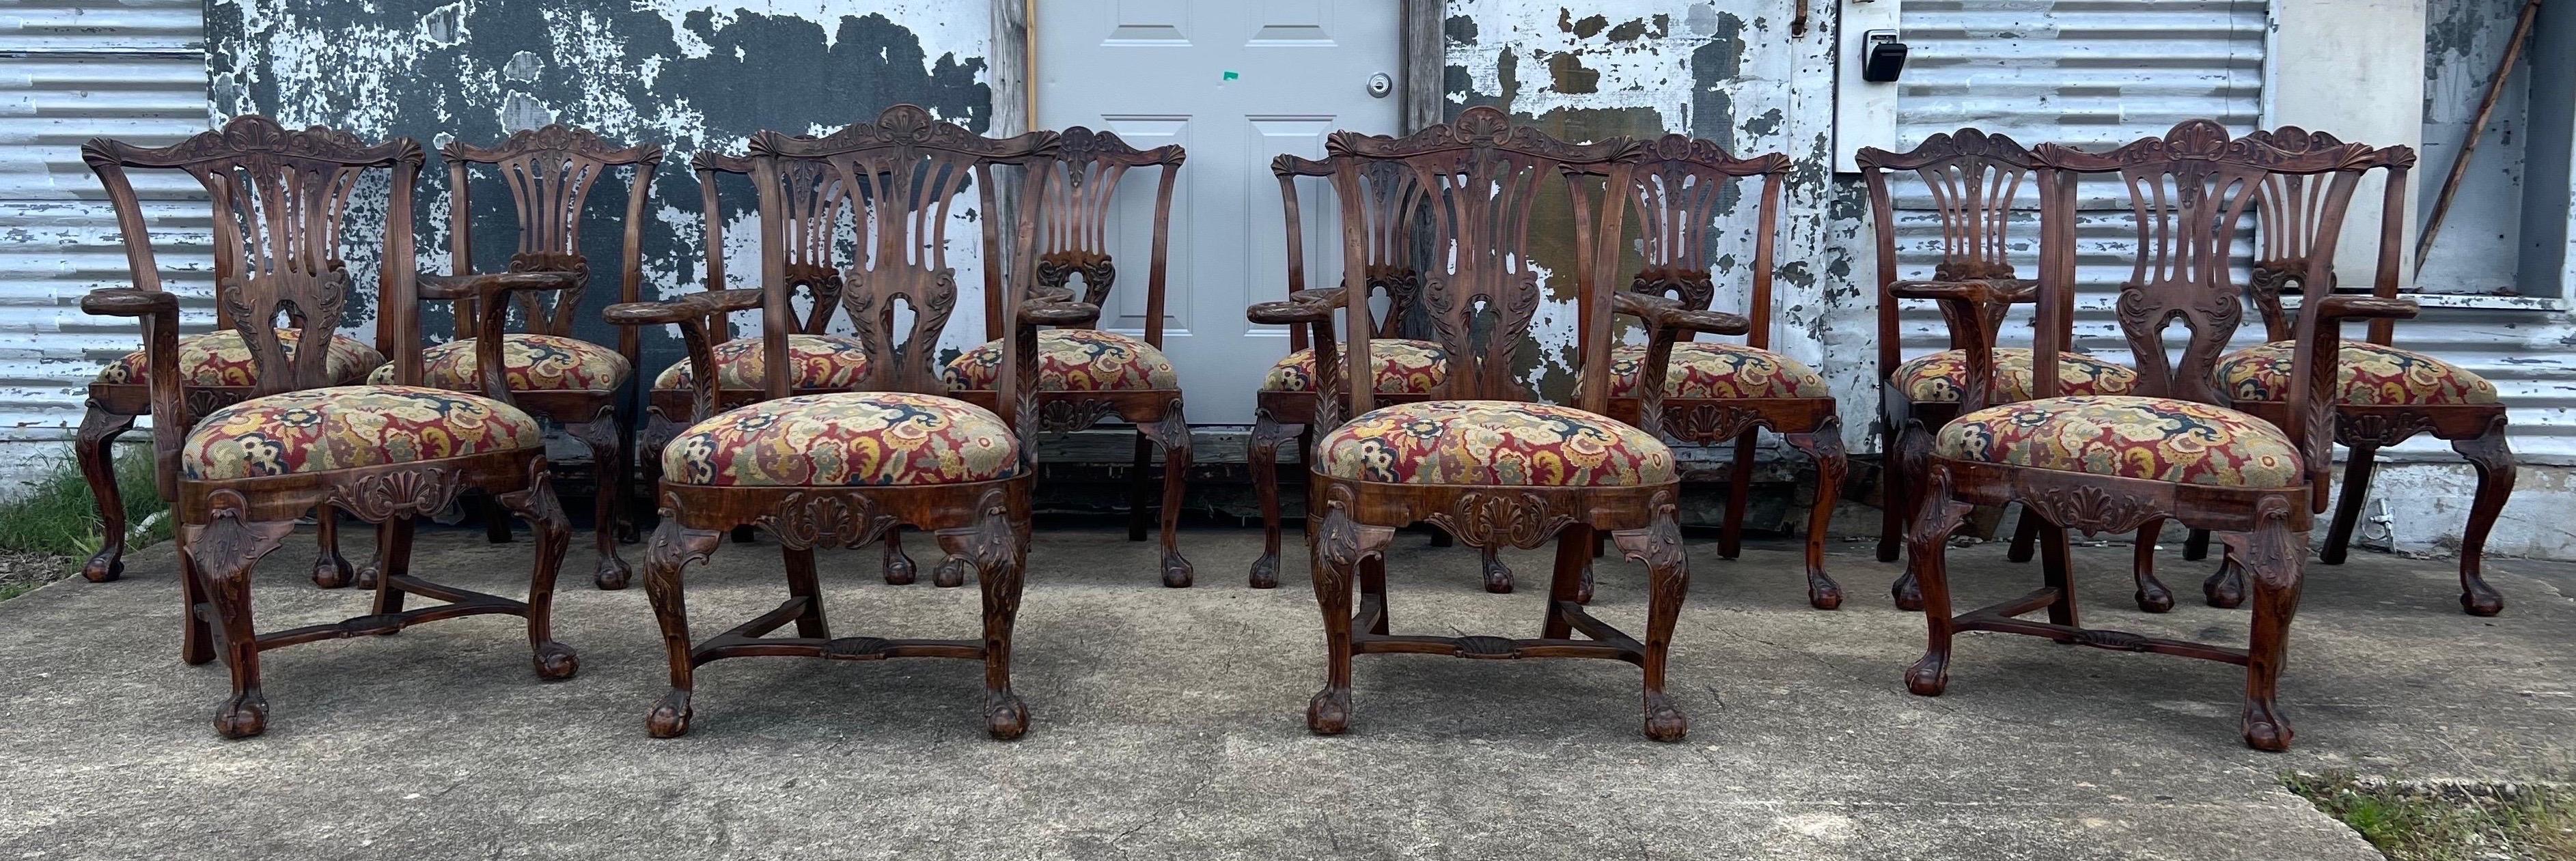 Great set of 12 19th century Irish dining chairs with a 19th- early 20th century label from an antiques dealer in Dublin. 

Set is comprised of 4 arm chairs and 8 sides, indicating they were probably from a much larger set made for a stately home.